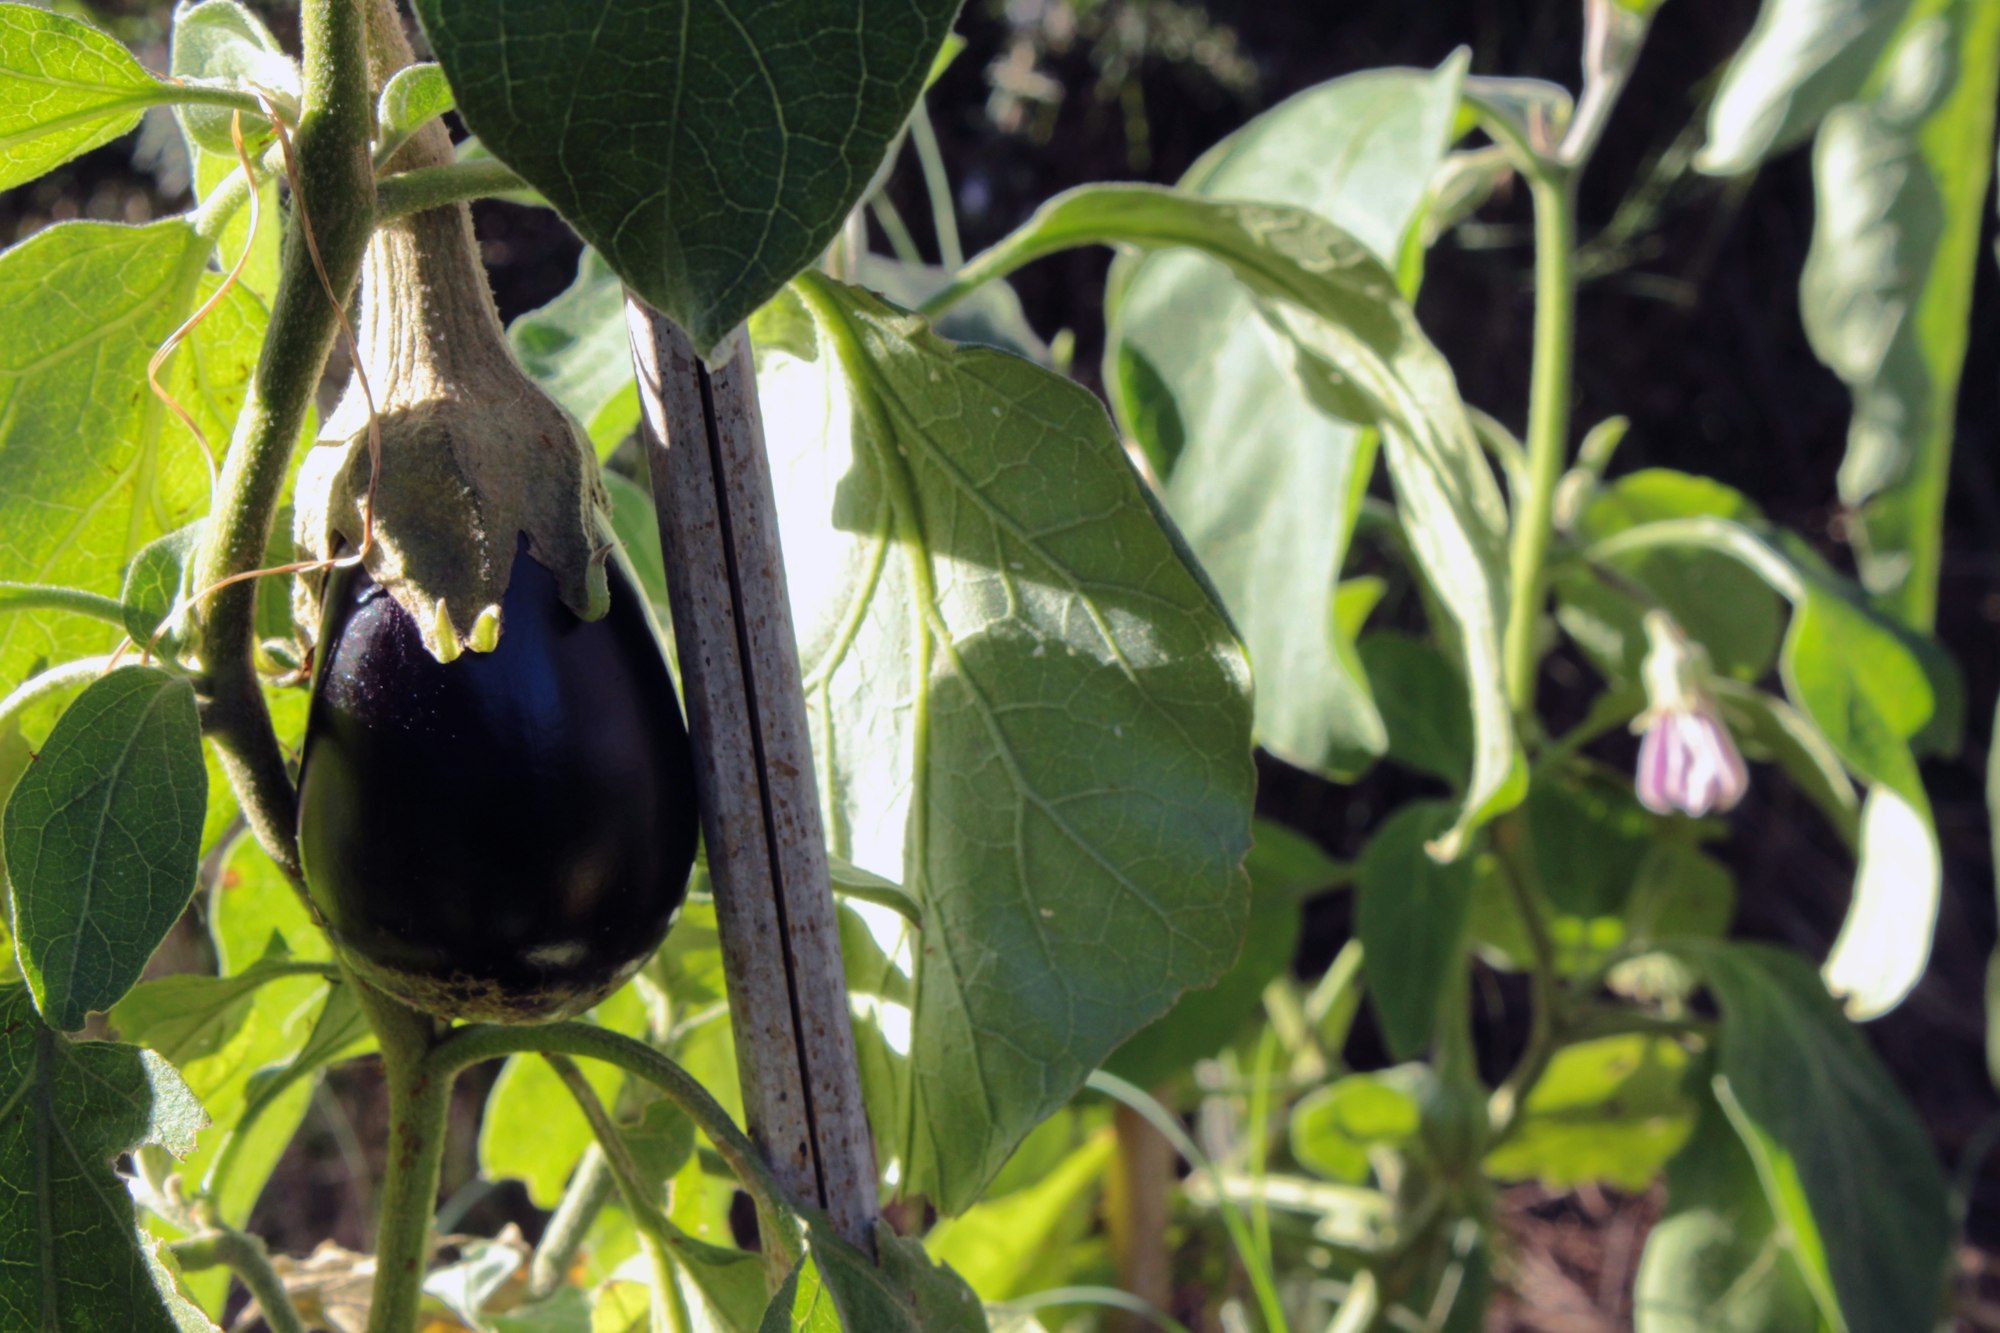 an eggplant growing on a plant in a garden